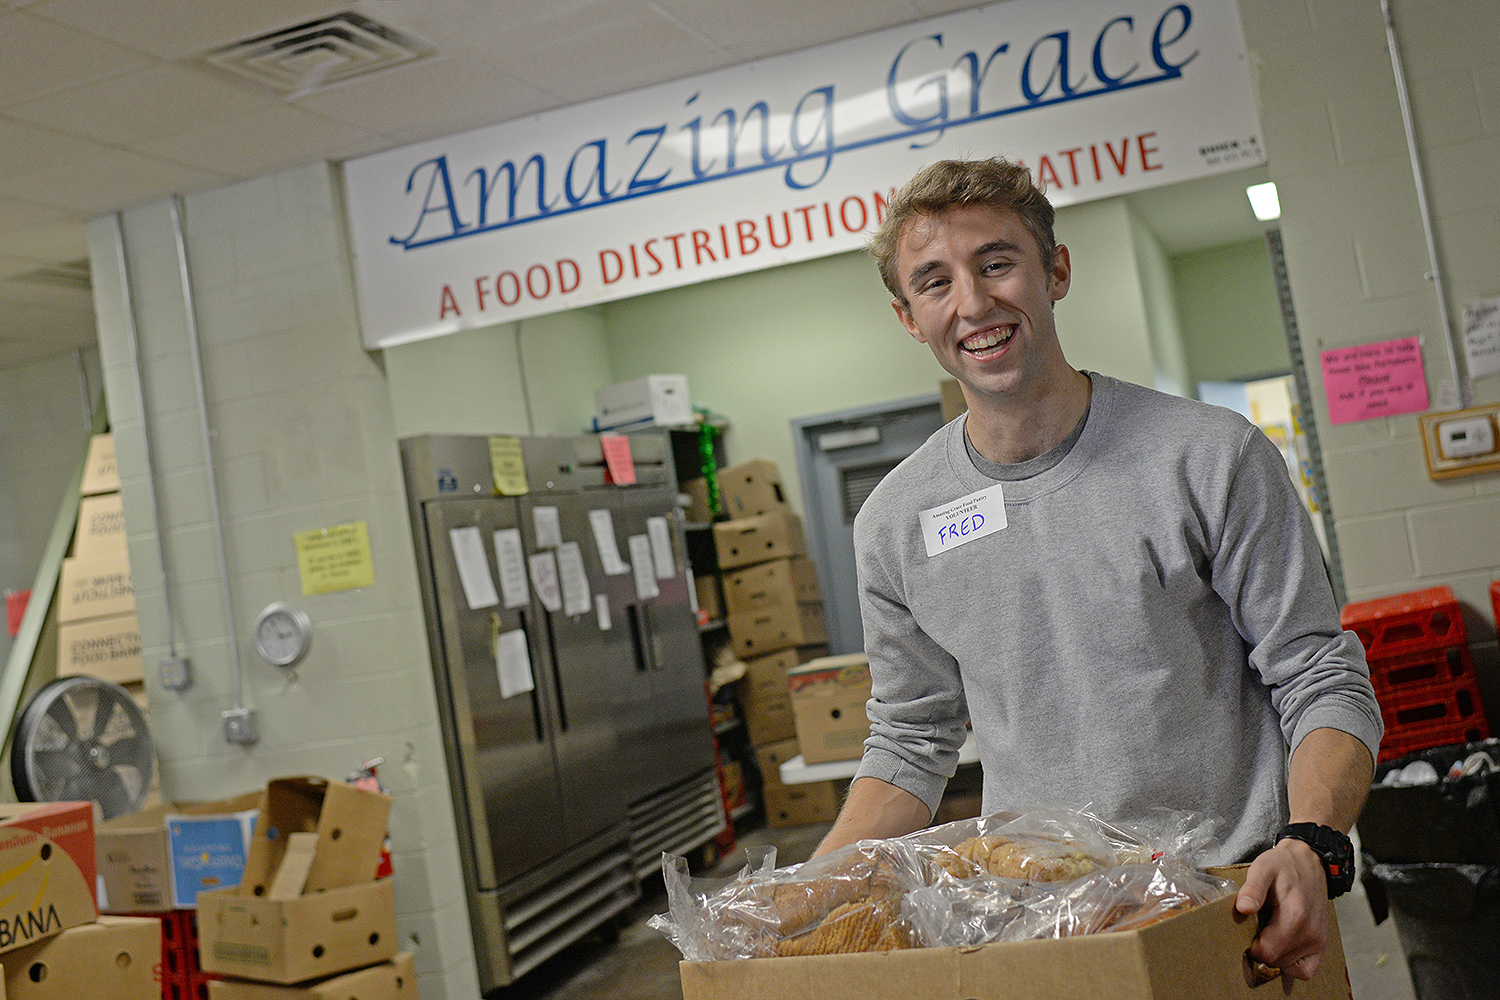 Fred Ayres '17 helps stock shelves at Amazing Grace Food Pantry in Middletown on Oct. 4. Ayers is one of several Wesleyan students and alumni who are volunteering at the food pantry this month.